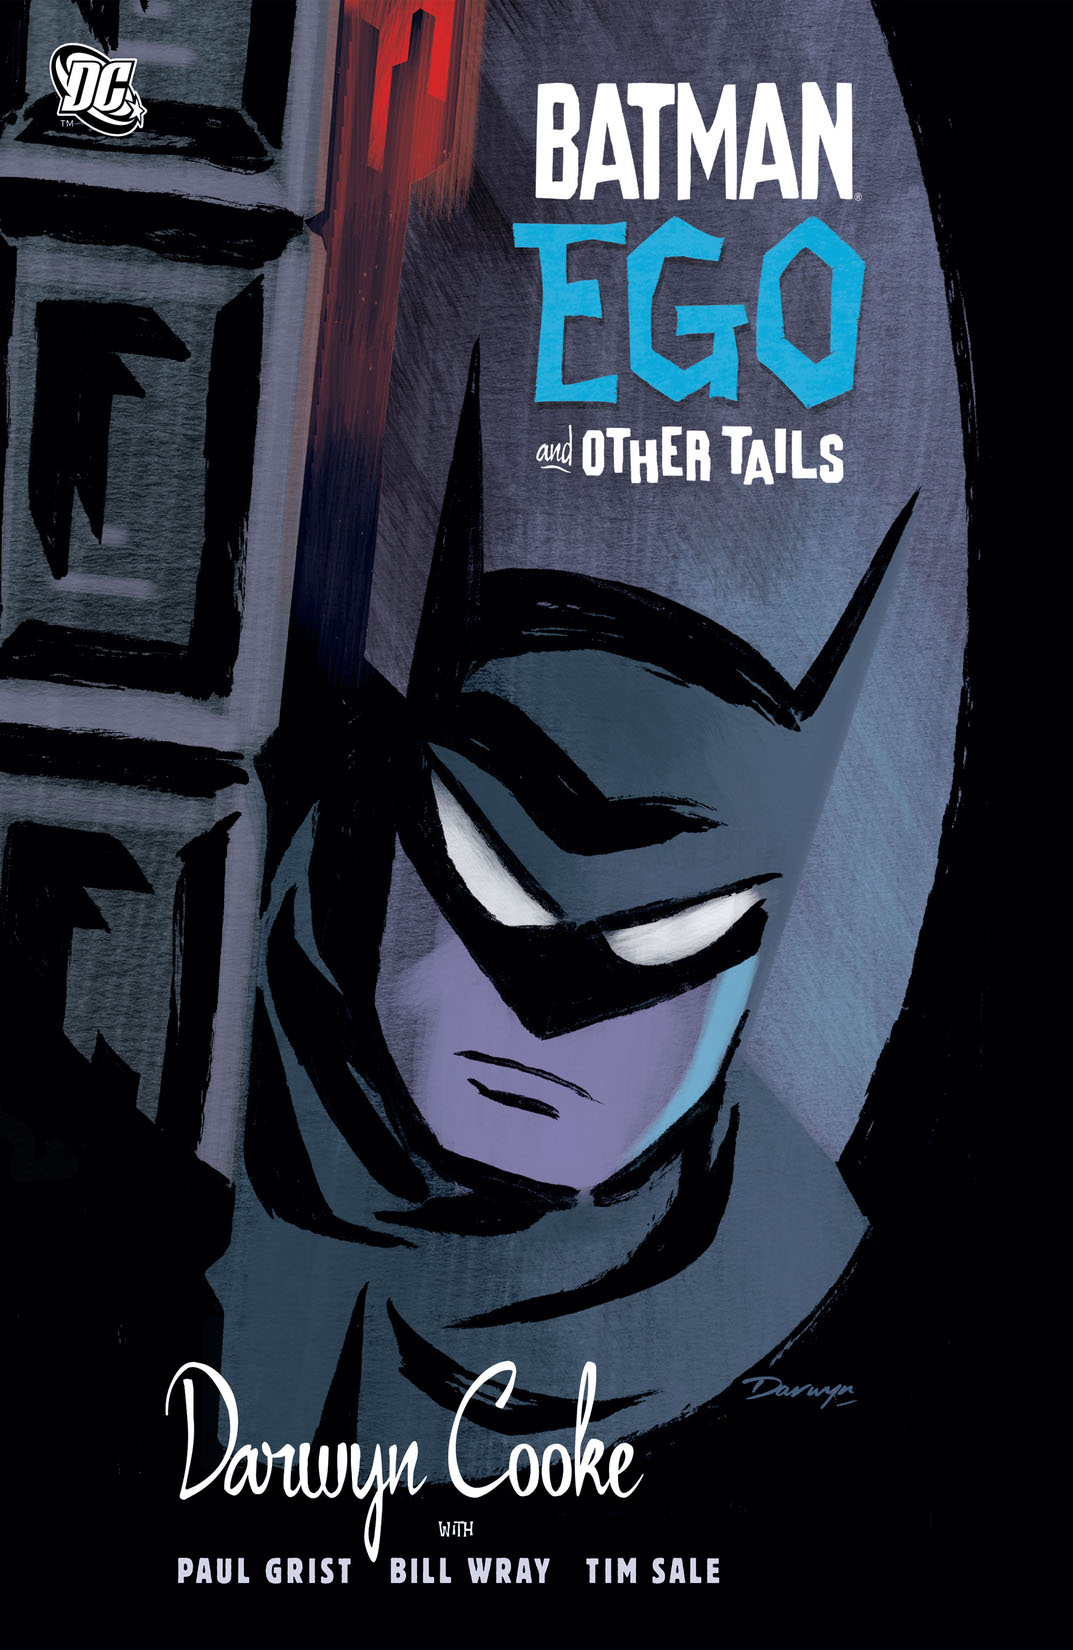 Batman: Ego and Other Tails preview images